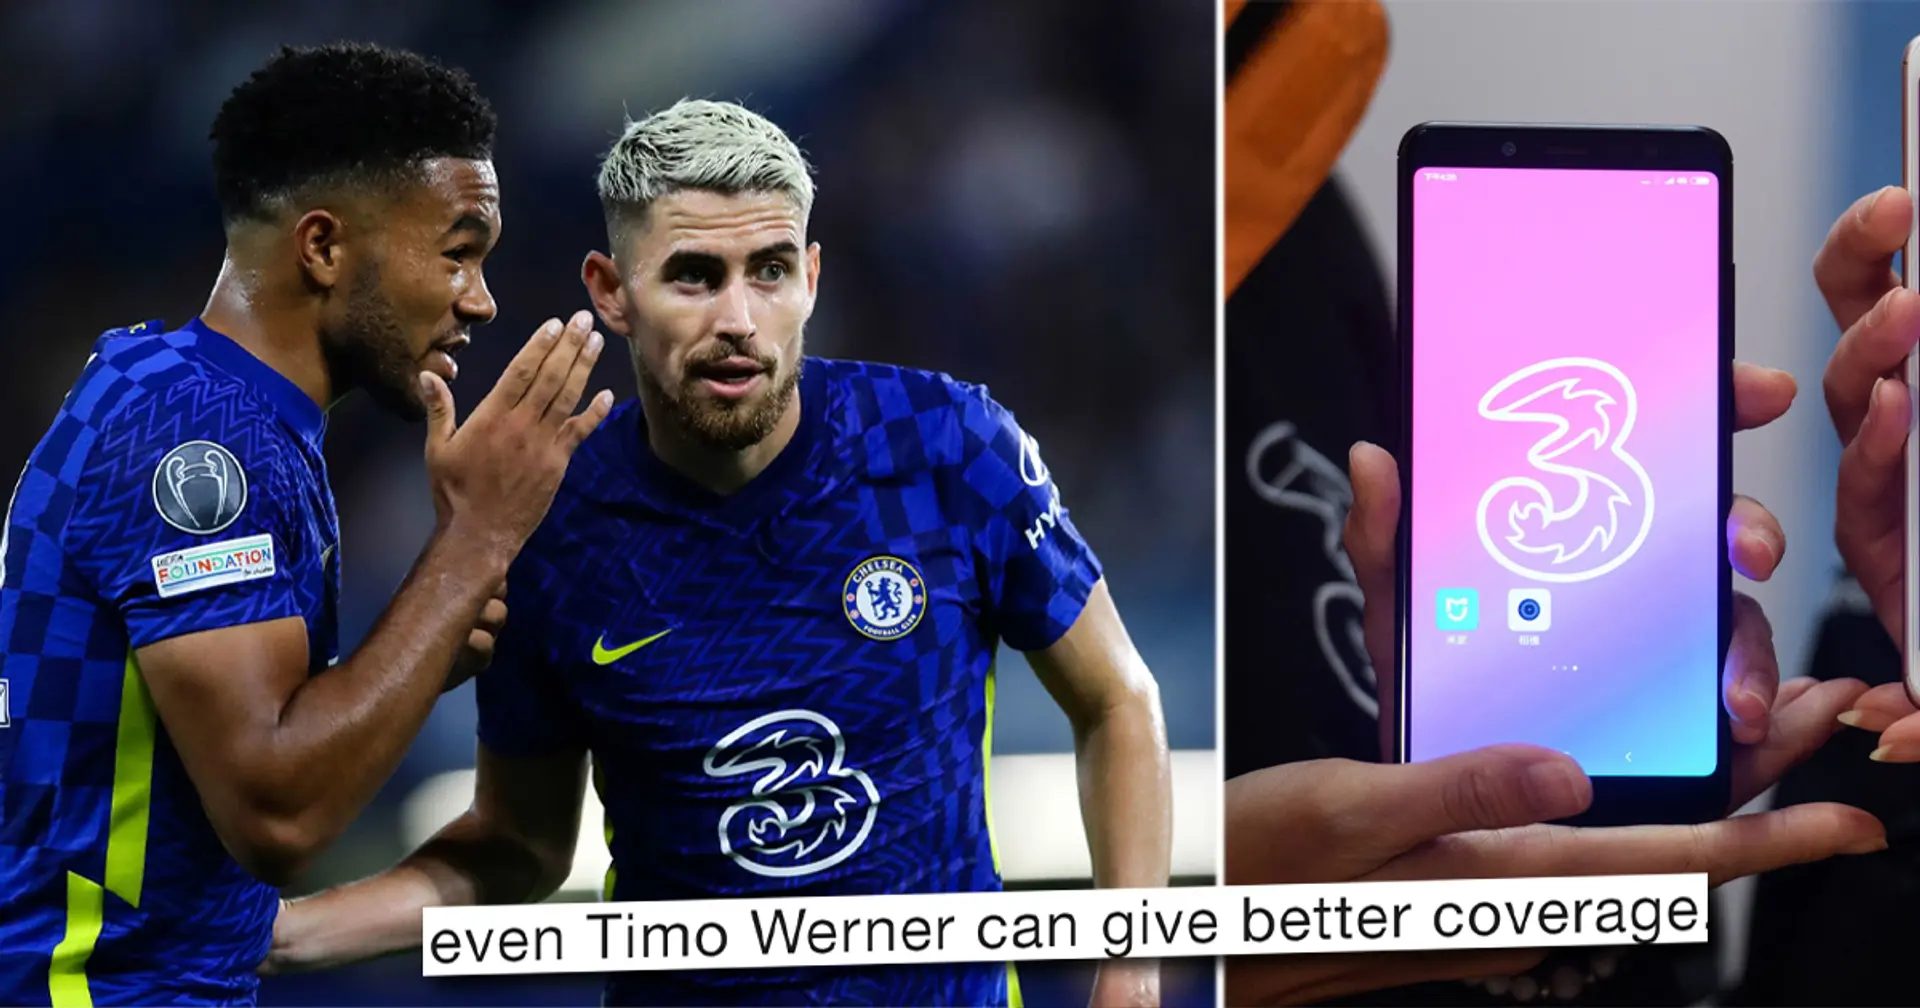 'Haven’t seen distribution this bad since Bakayoko': Chelsea fans ruin Three reviews after company suspends sponsorship deal